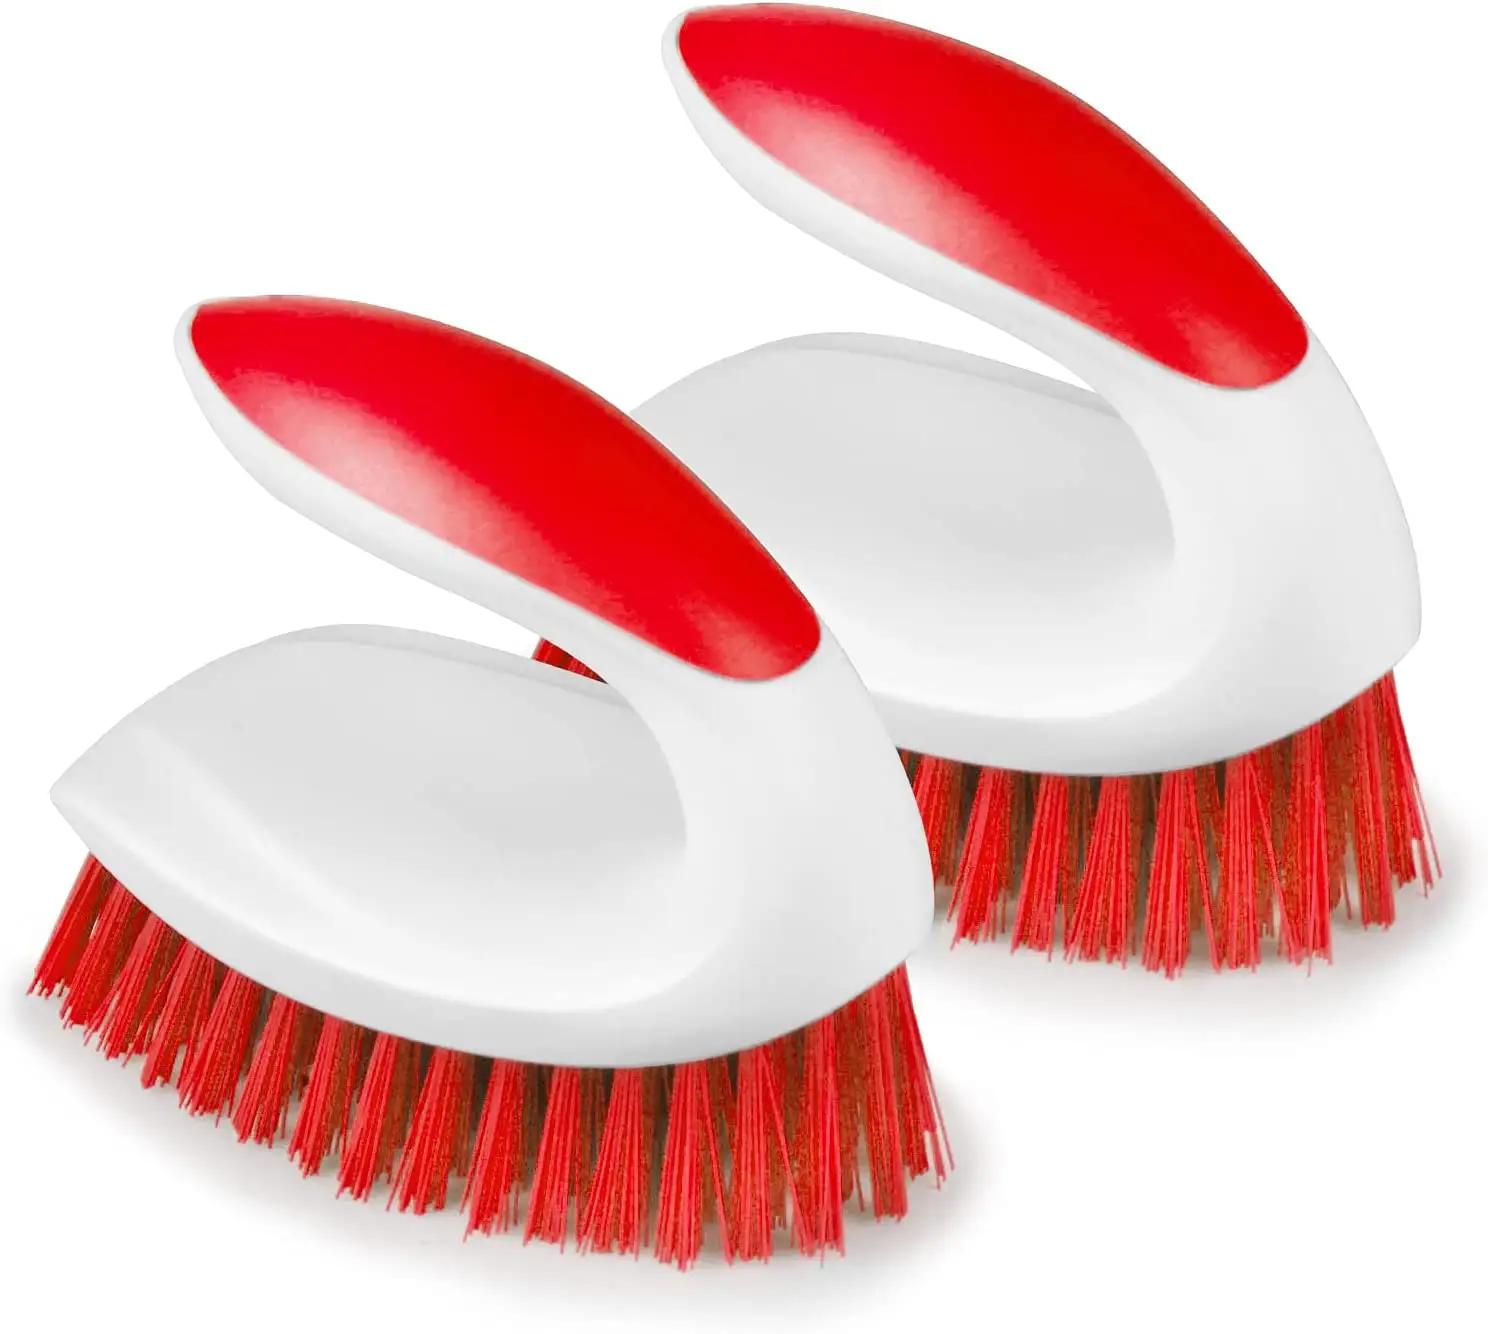 2 sets of household cleaning products Scrub brush carpet brush for cleaning sinks, bathrooms, etc